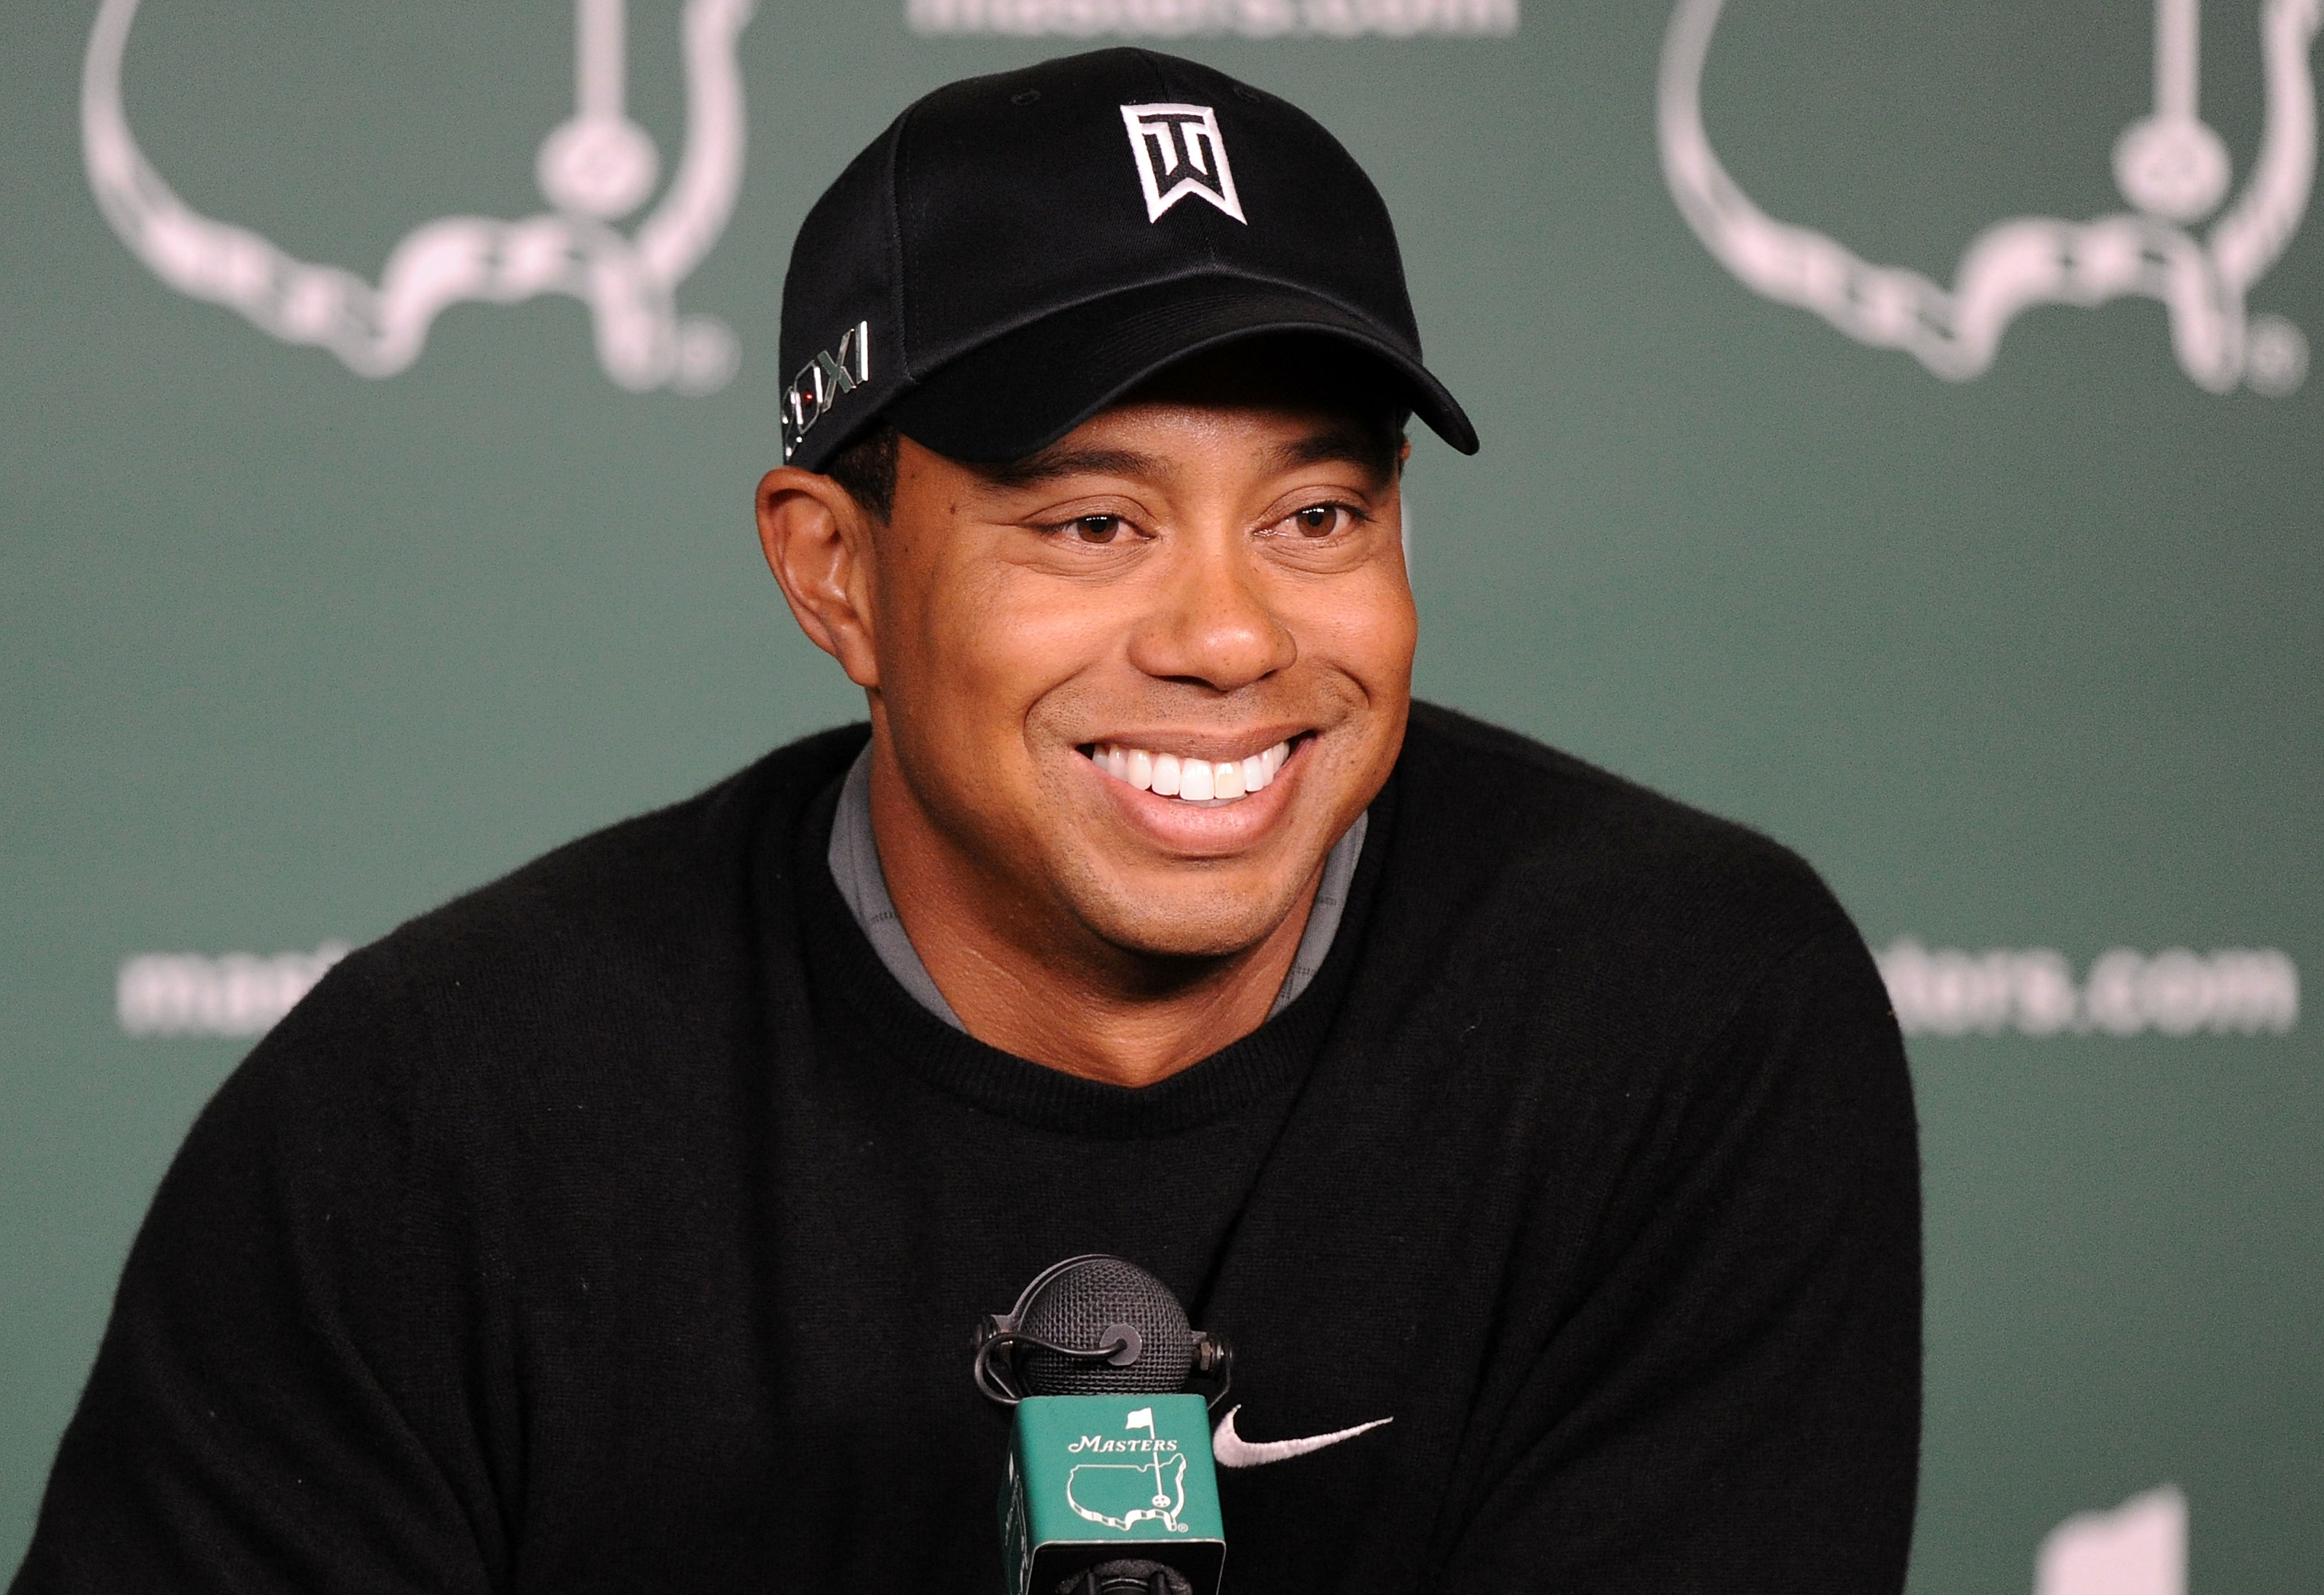 AUGUSTA, GA - APRIL 05:  Tiger Woods speaks to the media during a press conference during a practice round prior to the 2011 Masters Tournament at Augusta National Golf Club on April 5, 2011 in Augusta, Georgia.  (Photo by Harry How/Getty Images)